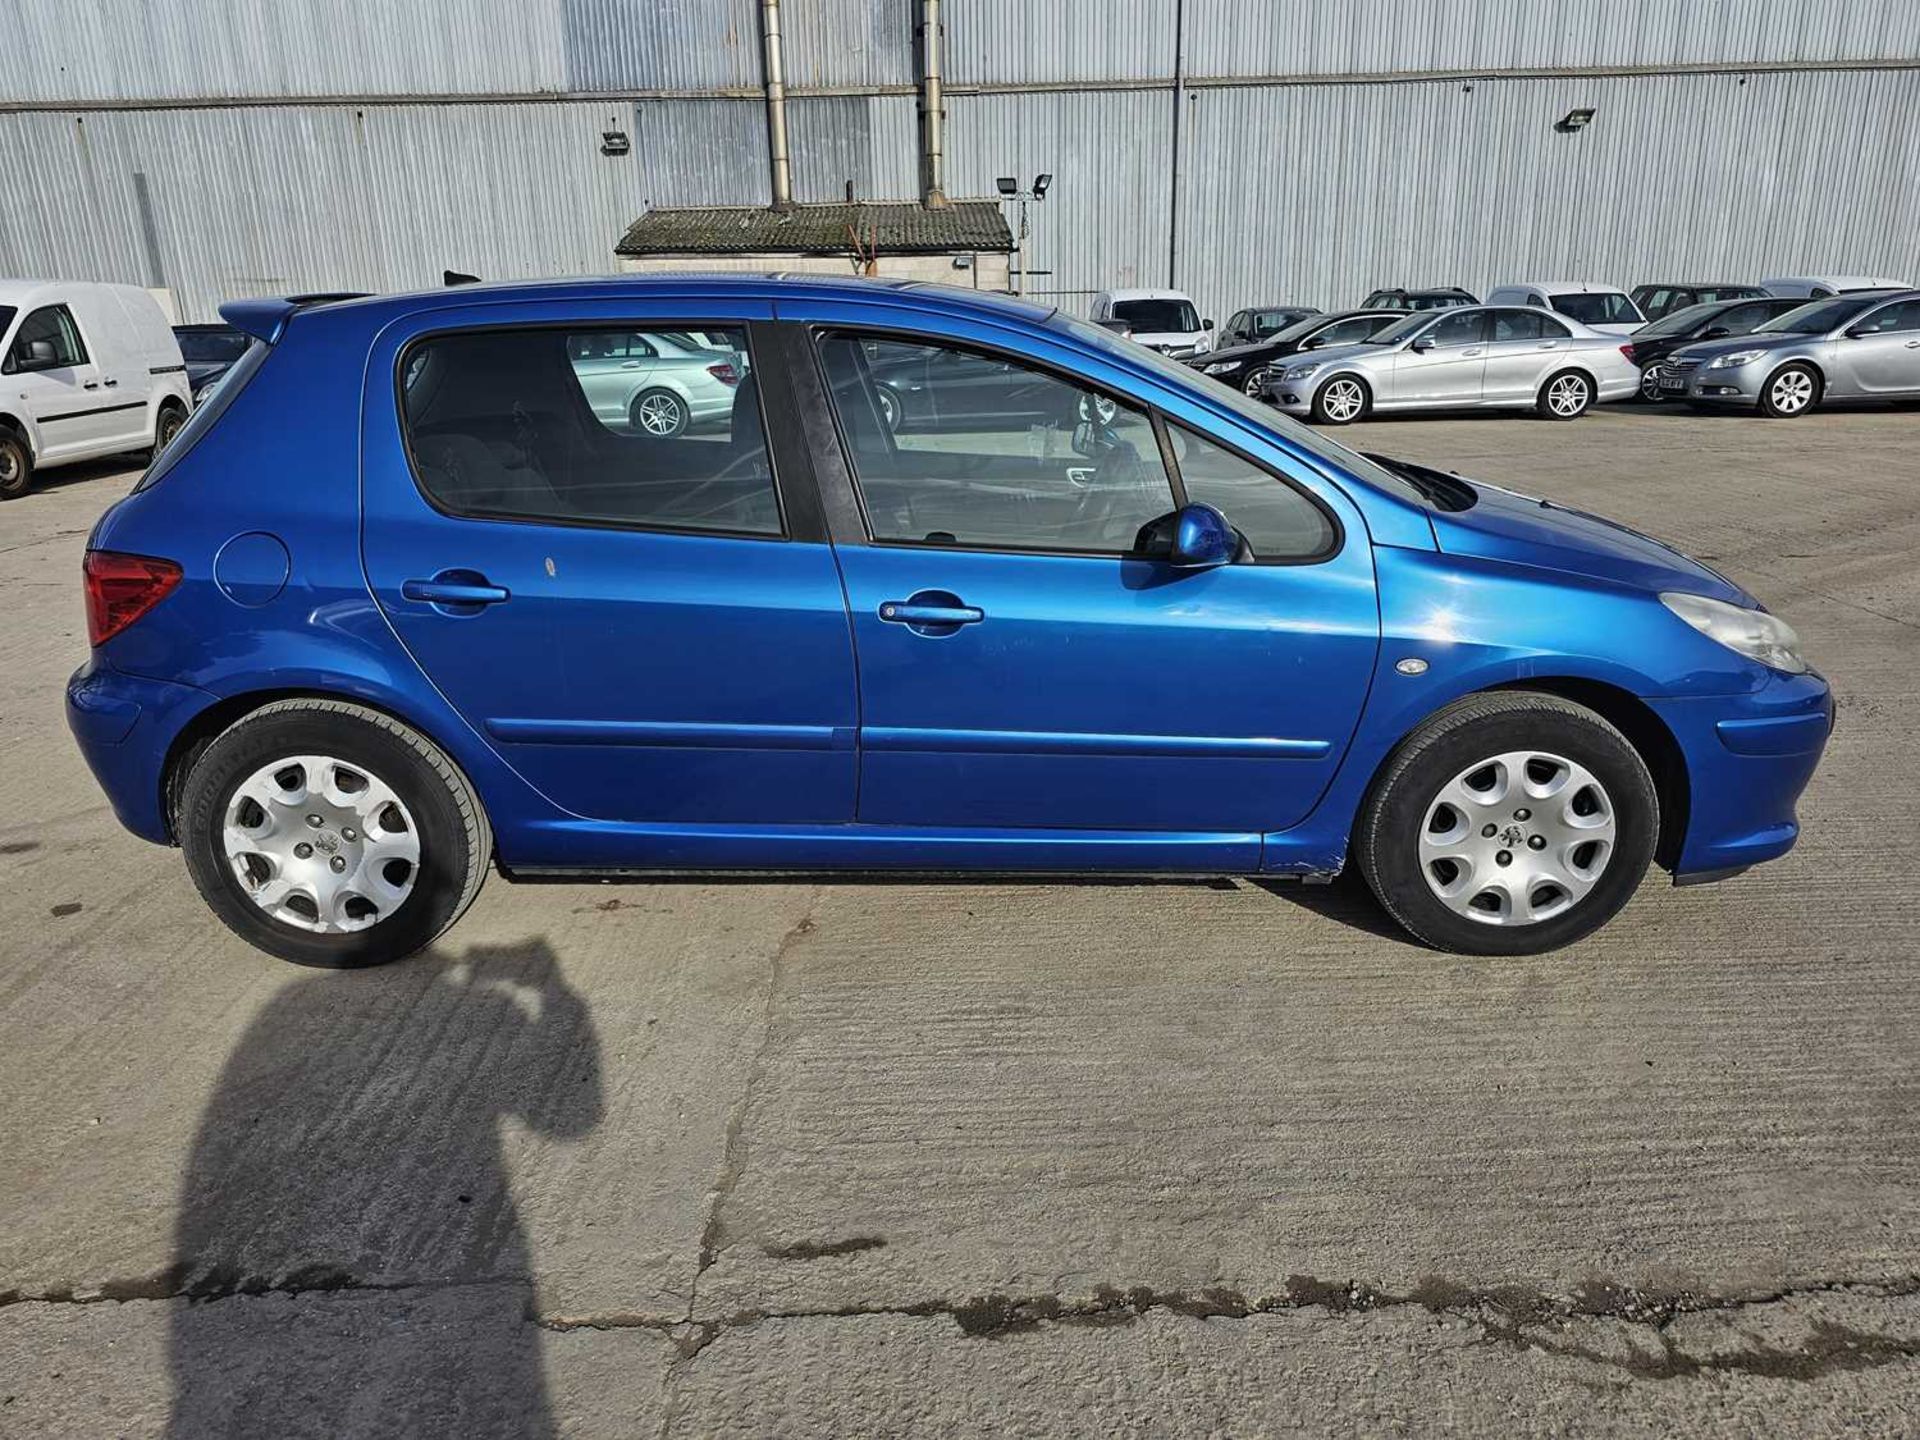 2007 Peugeot 307 X-line, 5 Speed, A/C (Reg. Docs. & Service History Available, Tested 07/24) - Image 8 of 56